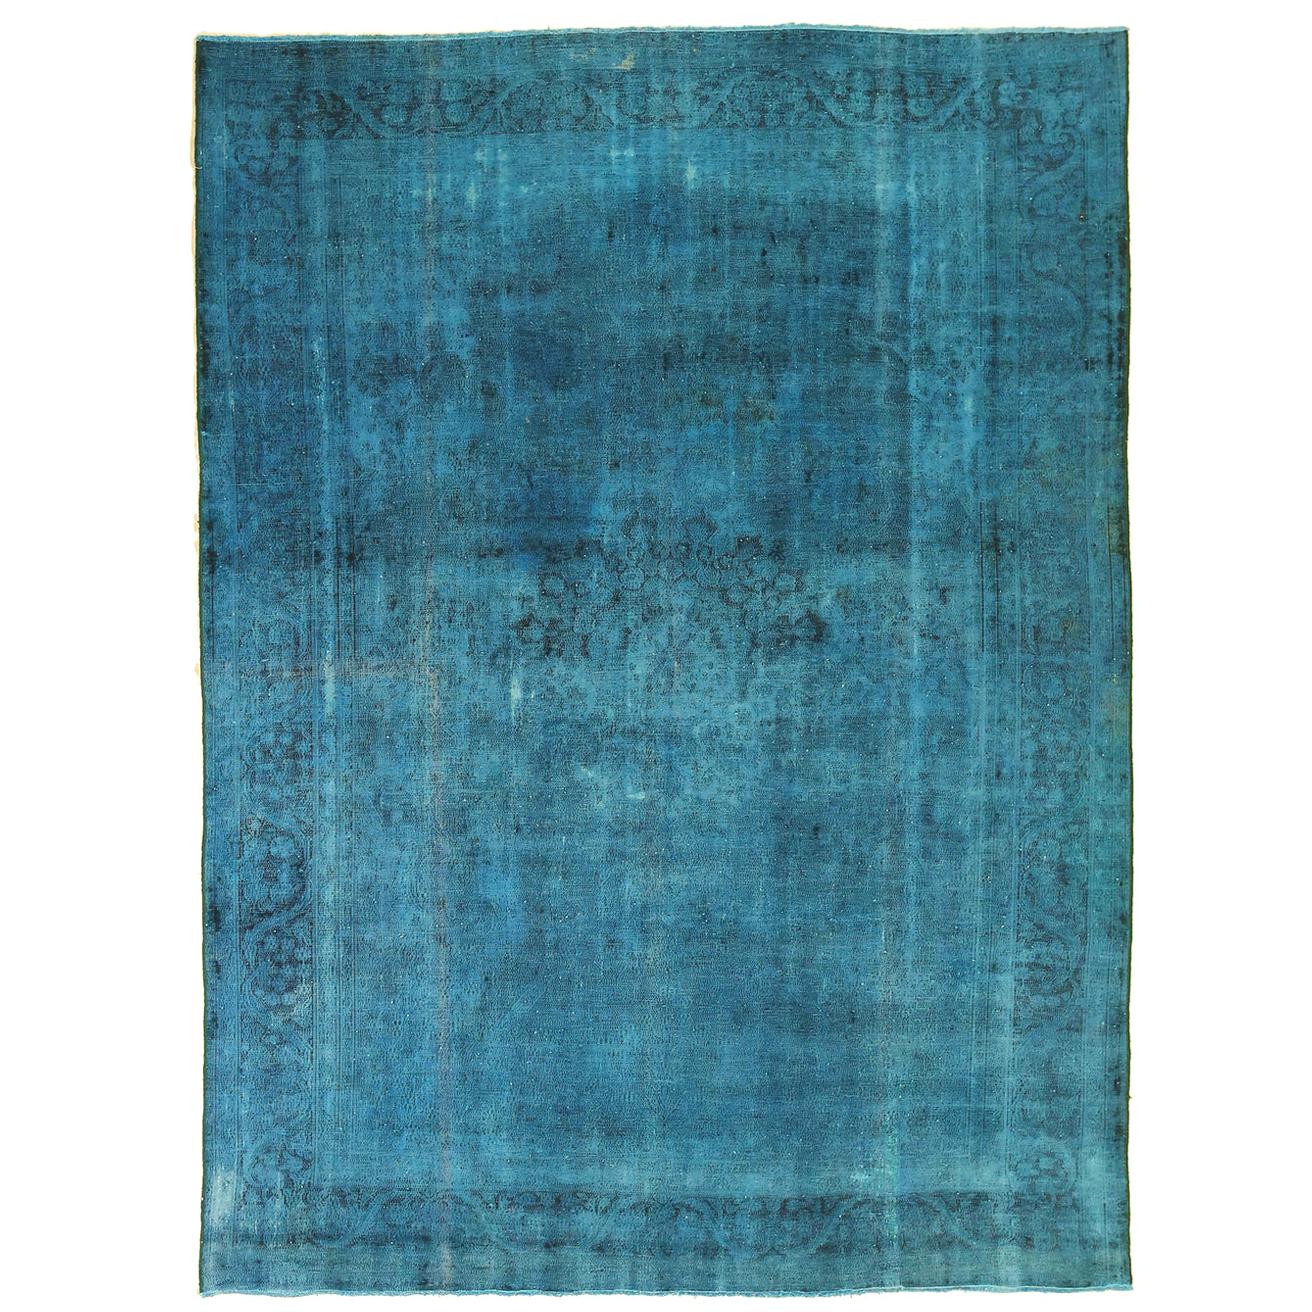 Overdye Persian Rug with Faded Blue and Black Botanical Details